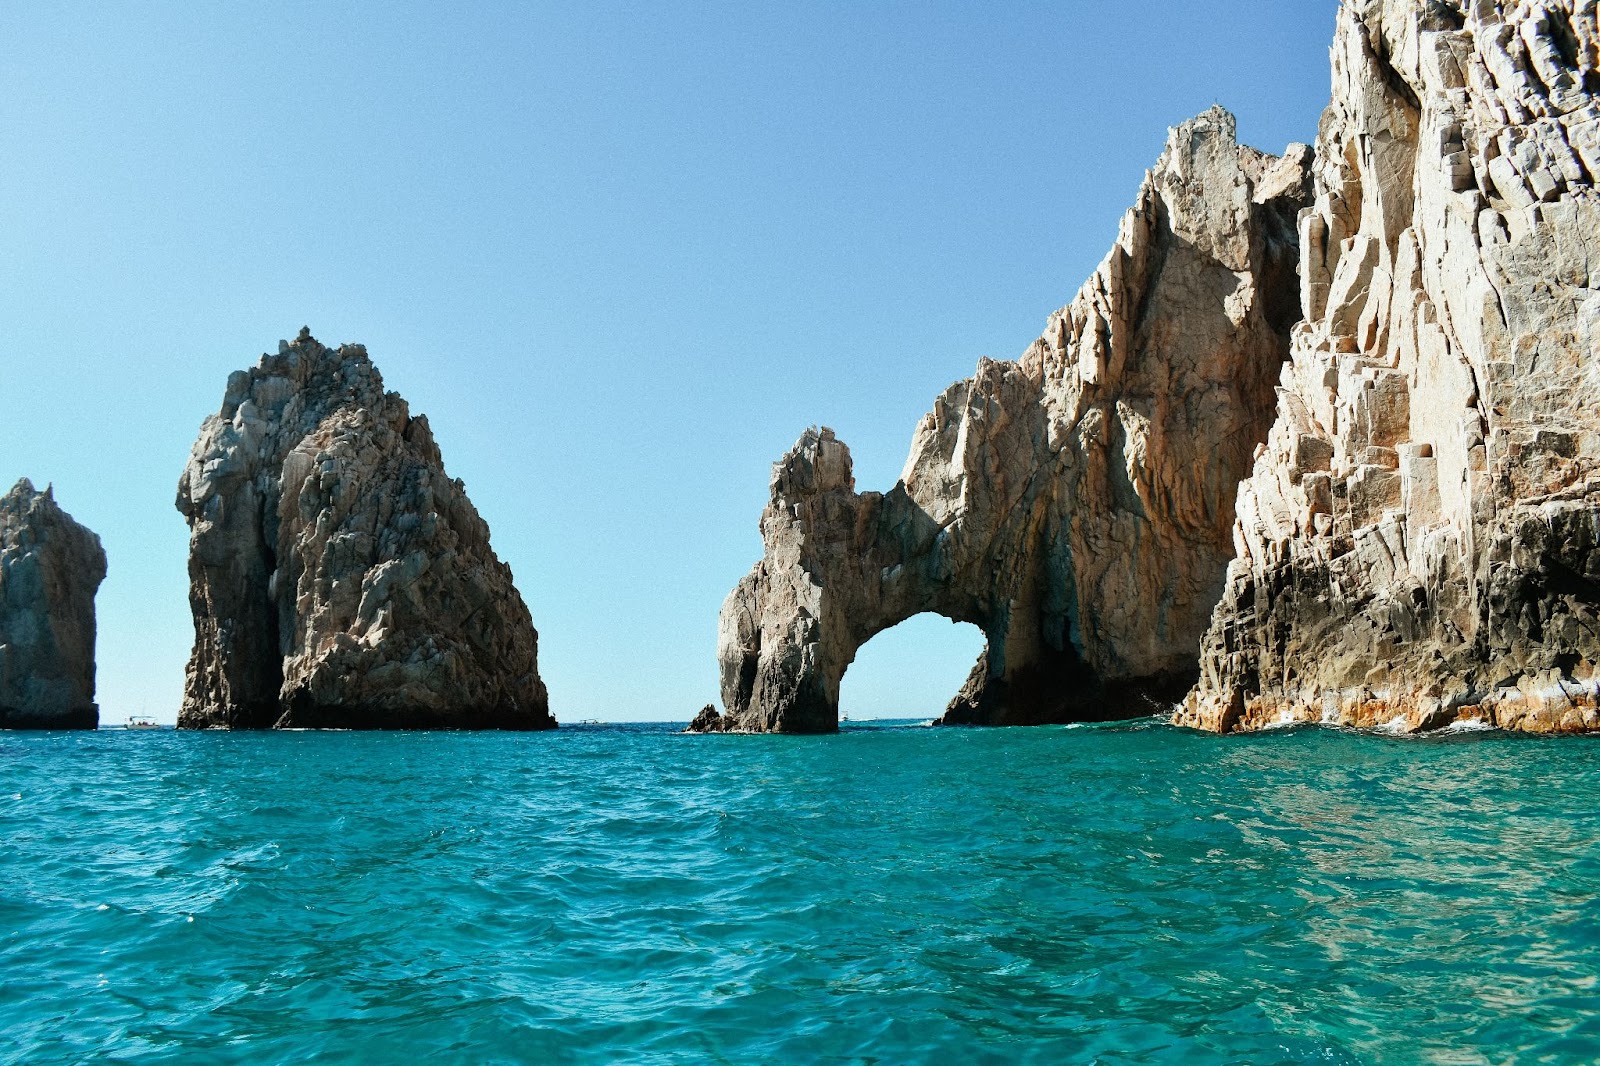 Sunset Cruise of the Arch at Cabo San Lucas